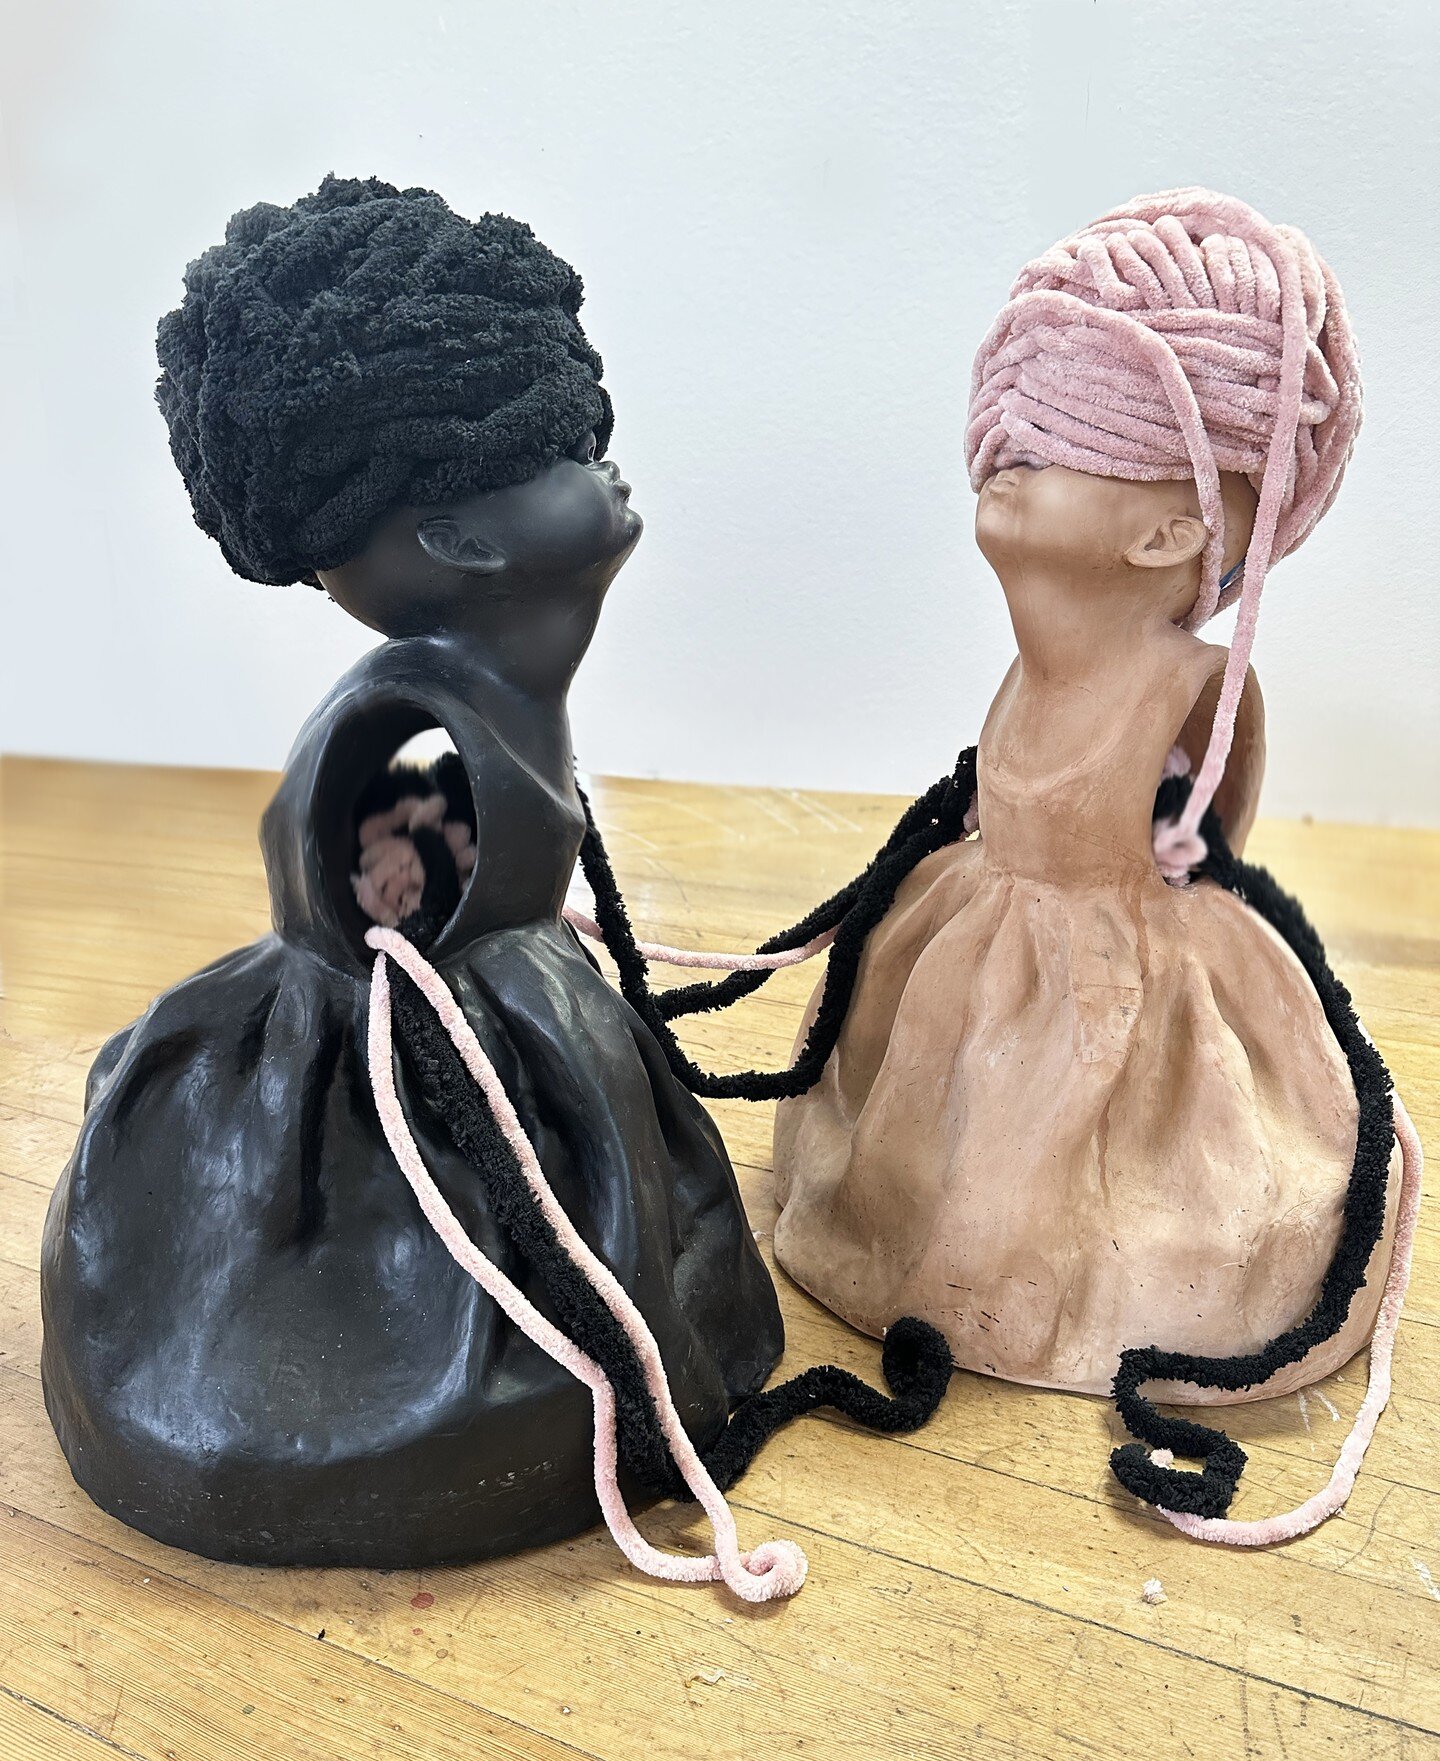 Sisters 2, cast cement and yarn, I cast these figures a while ago and am finishing them this year, hurray! Daughter Michelle inspired the images of the figures. More to come... #newsurrealism #fantasyart #sculpture #figurativeart #multi-media #textil